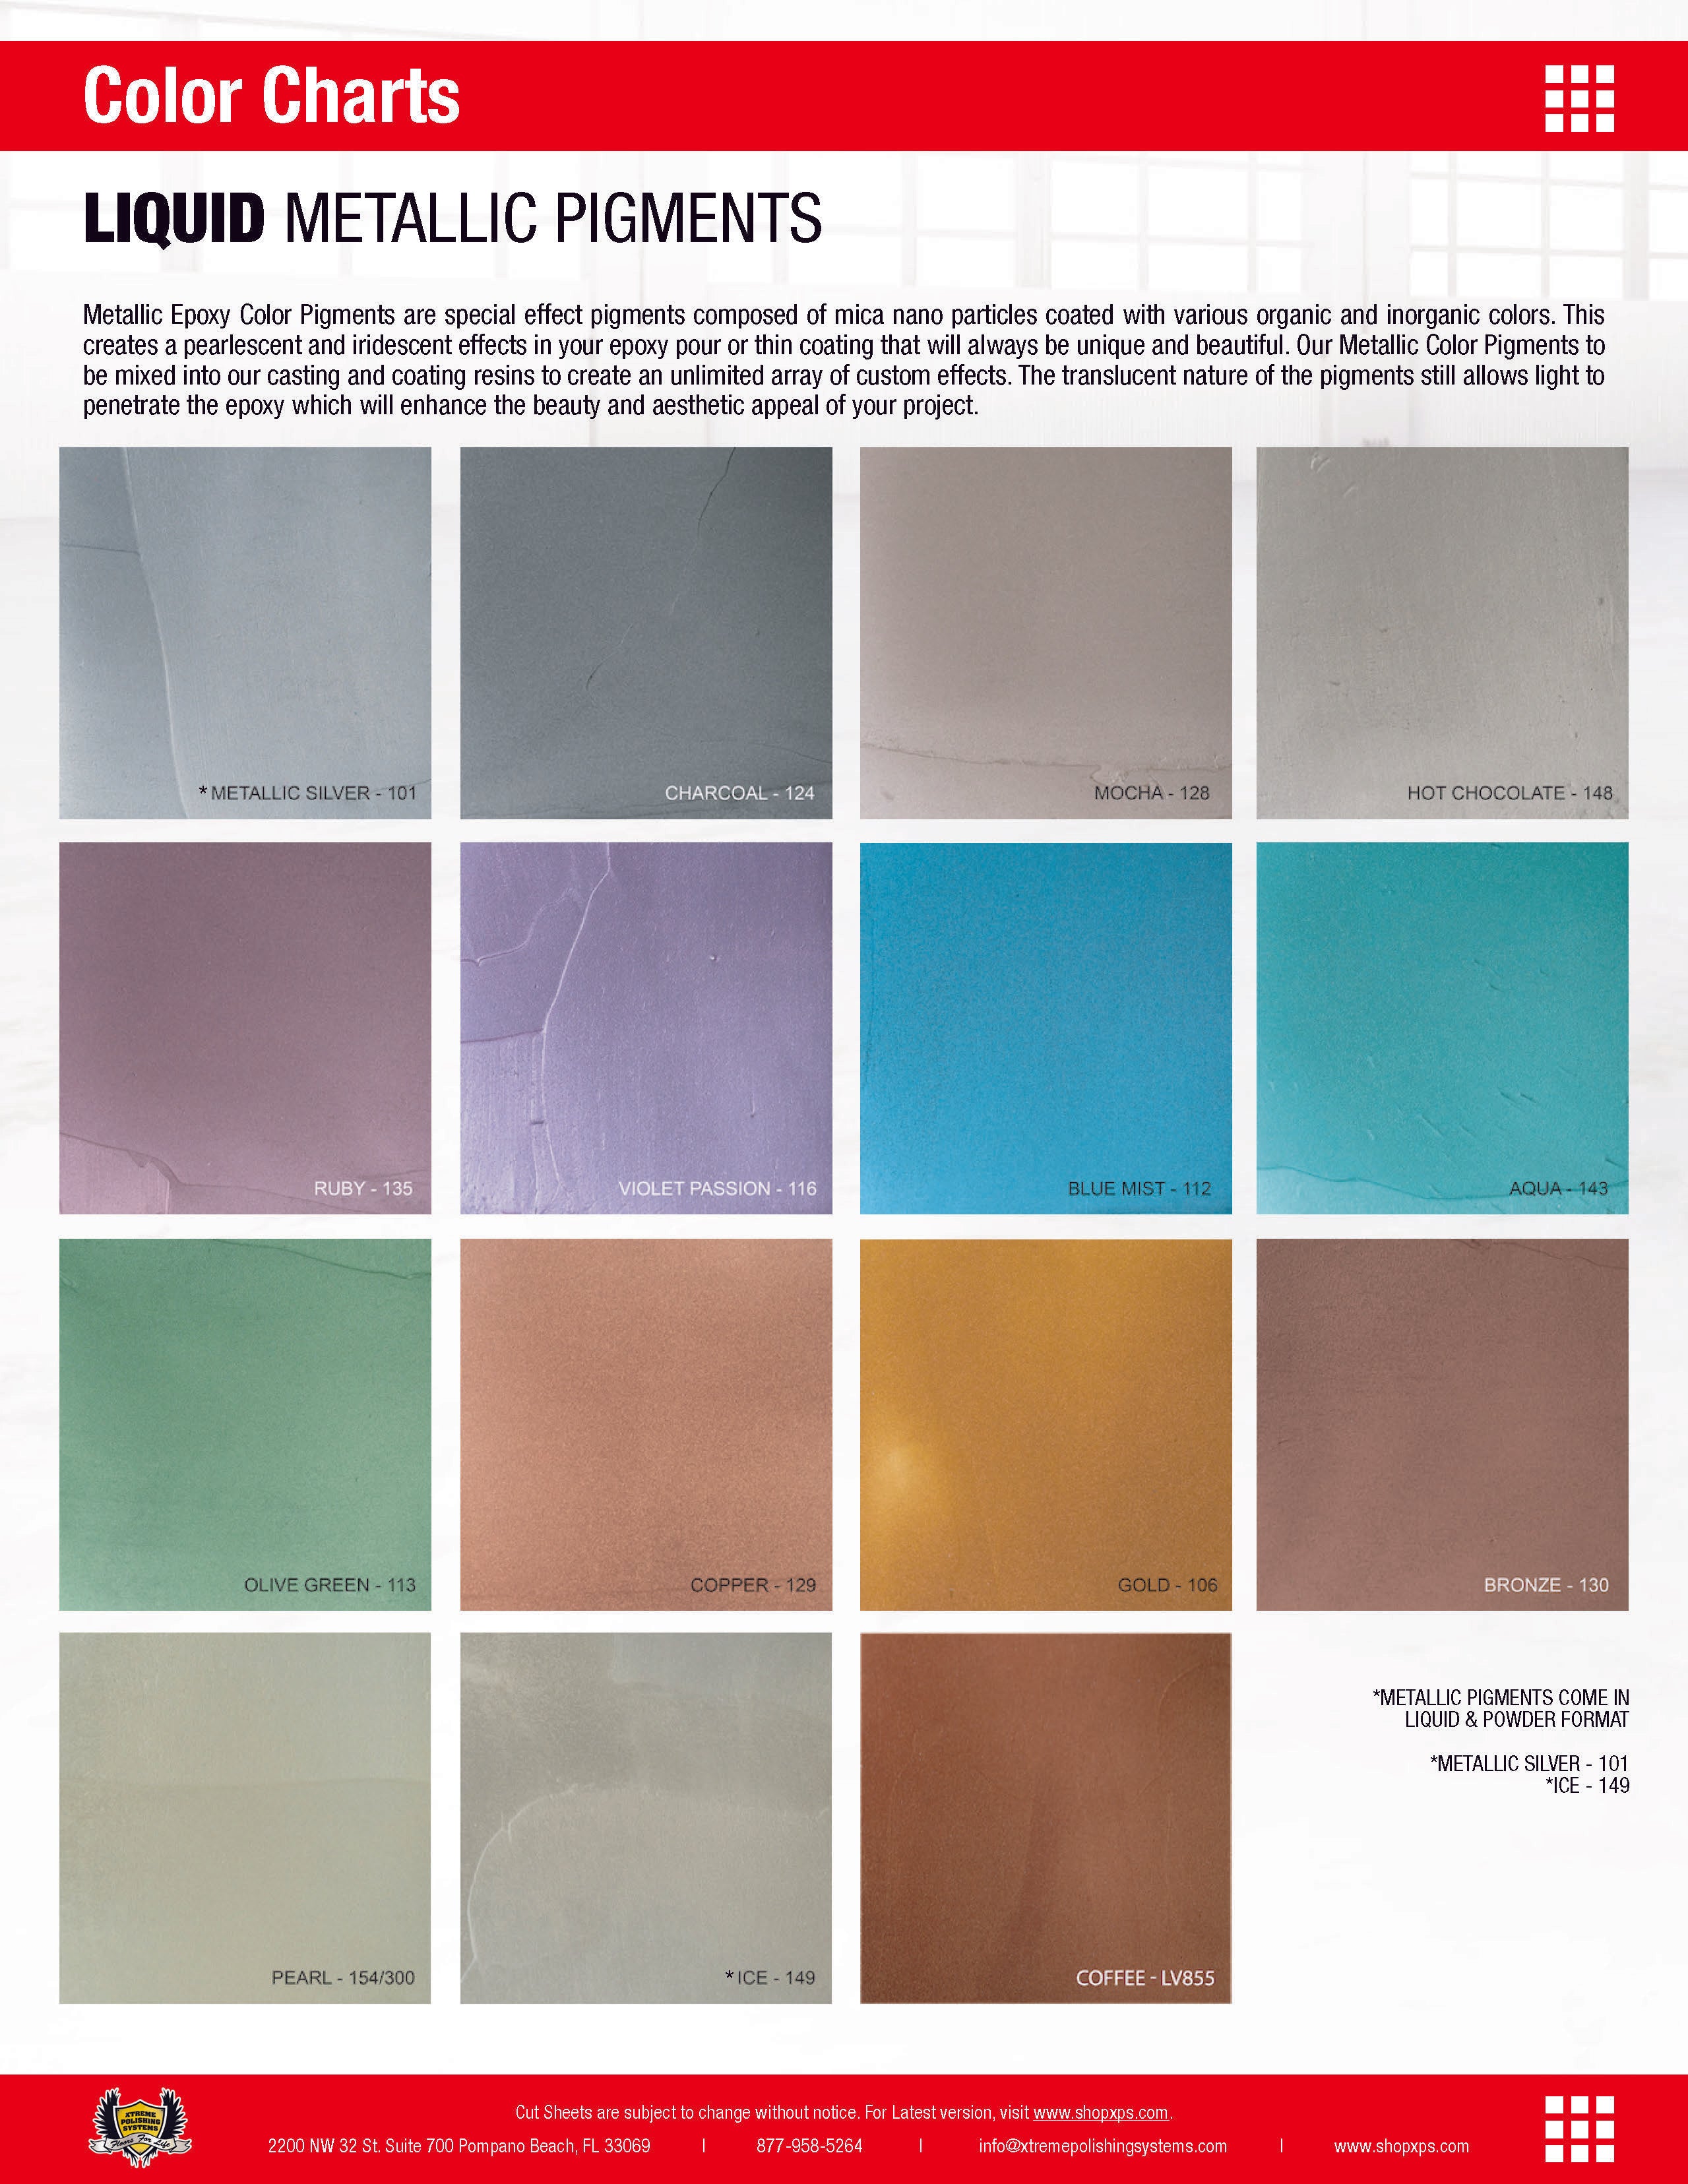 XPS Liquid Metallic Pigments Color Chart with description of epoxy coatings and color pigments swatches with color name and number